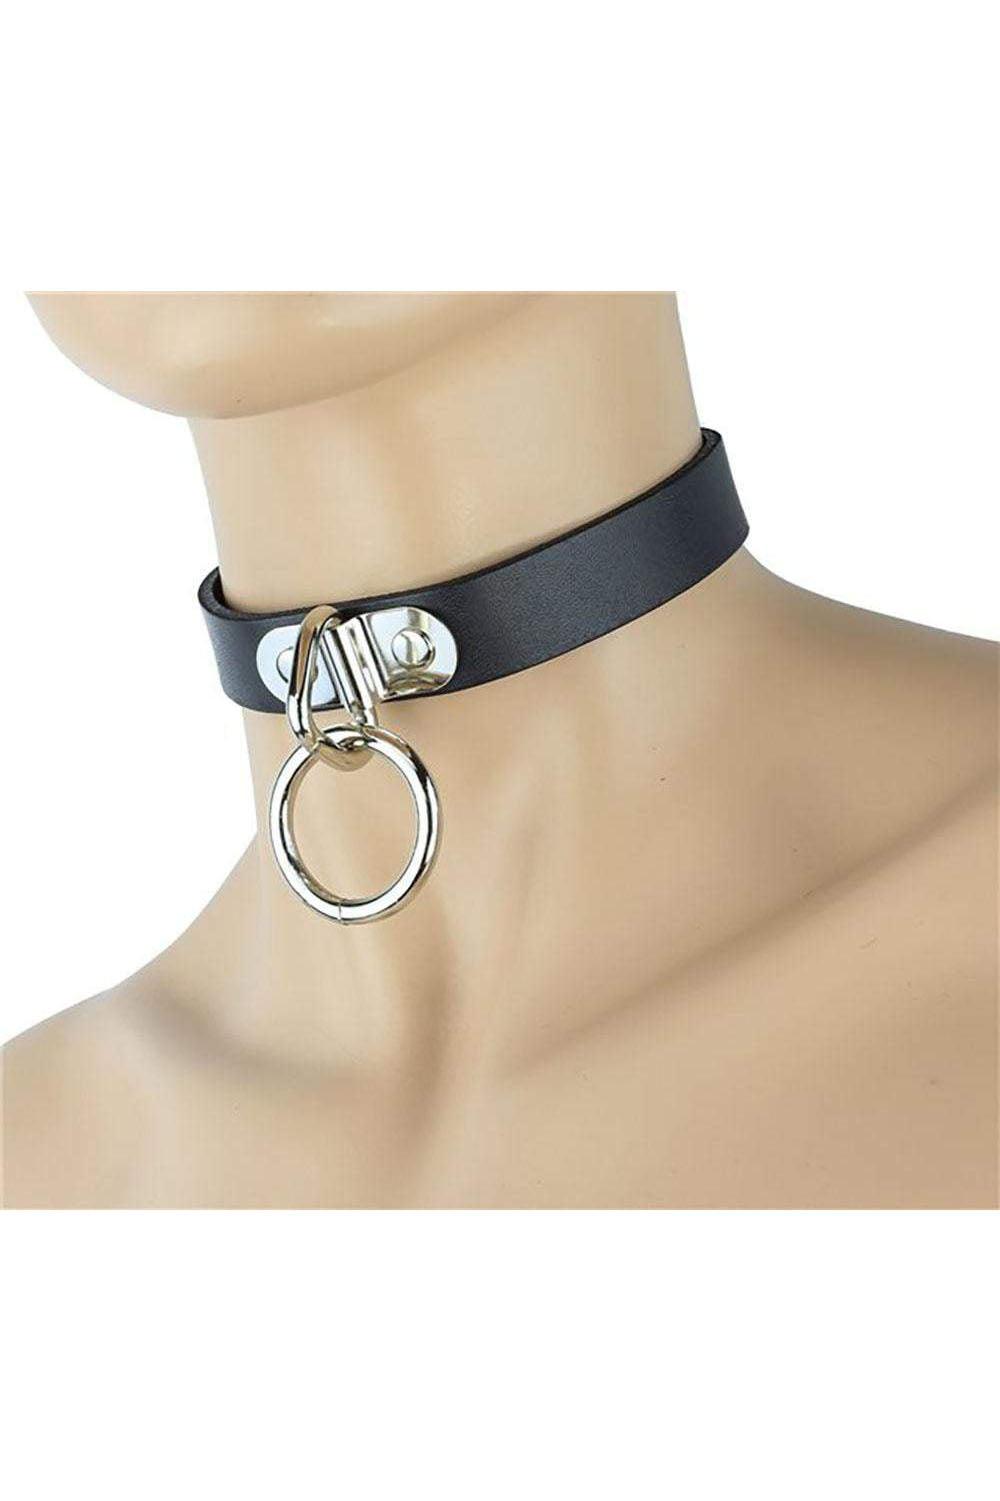 Funk Plus Cut Throat O-Ring Collar [Multiple Colors Available] - VampireFreaks